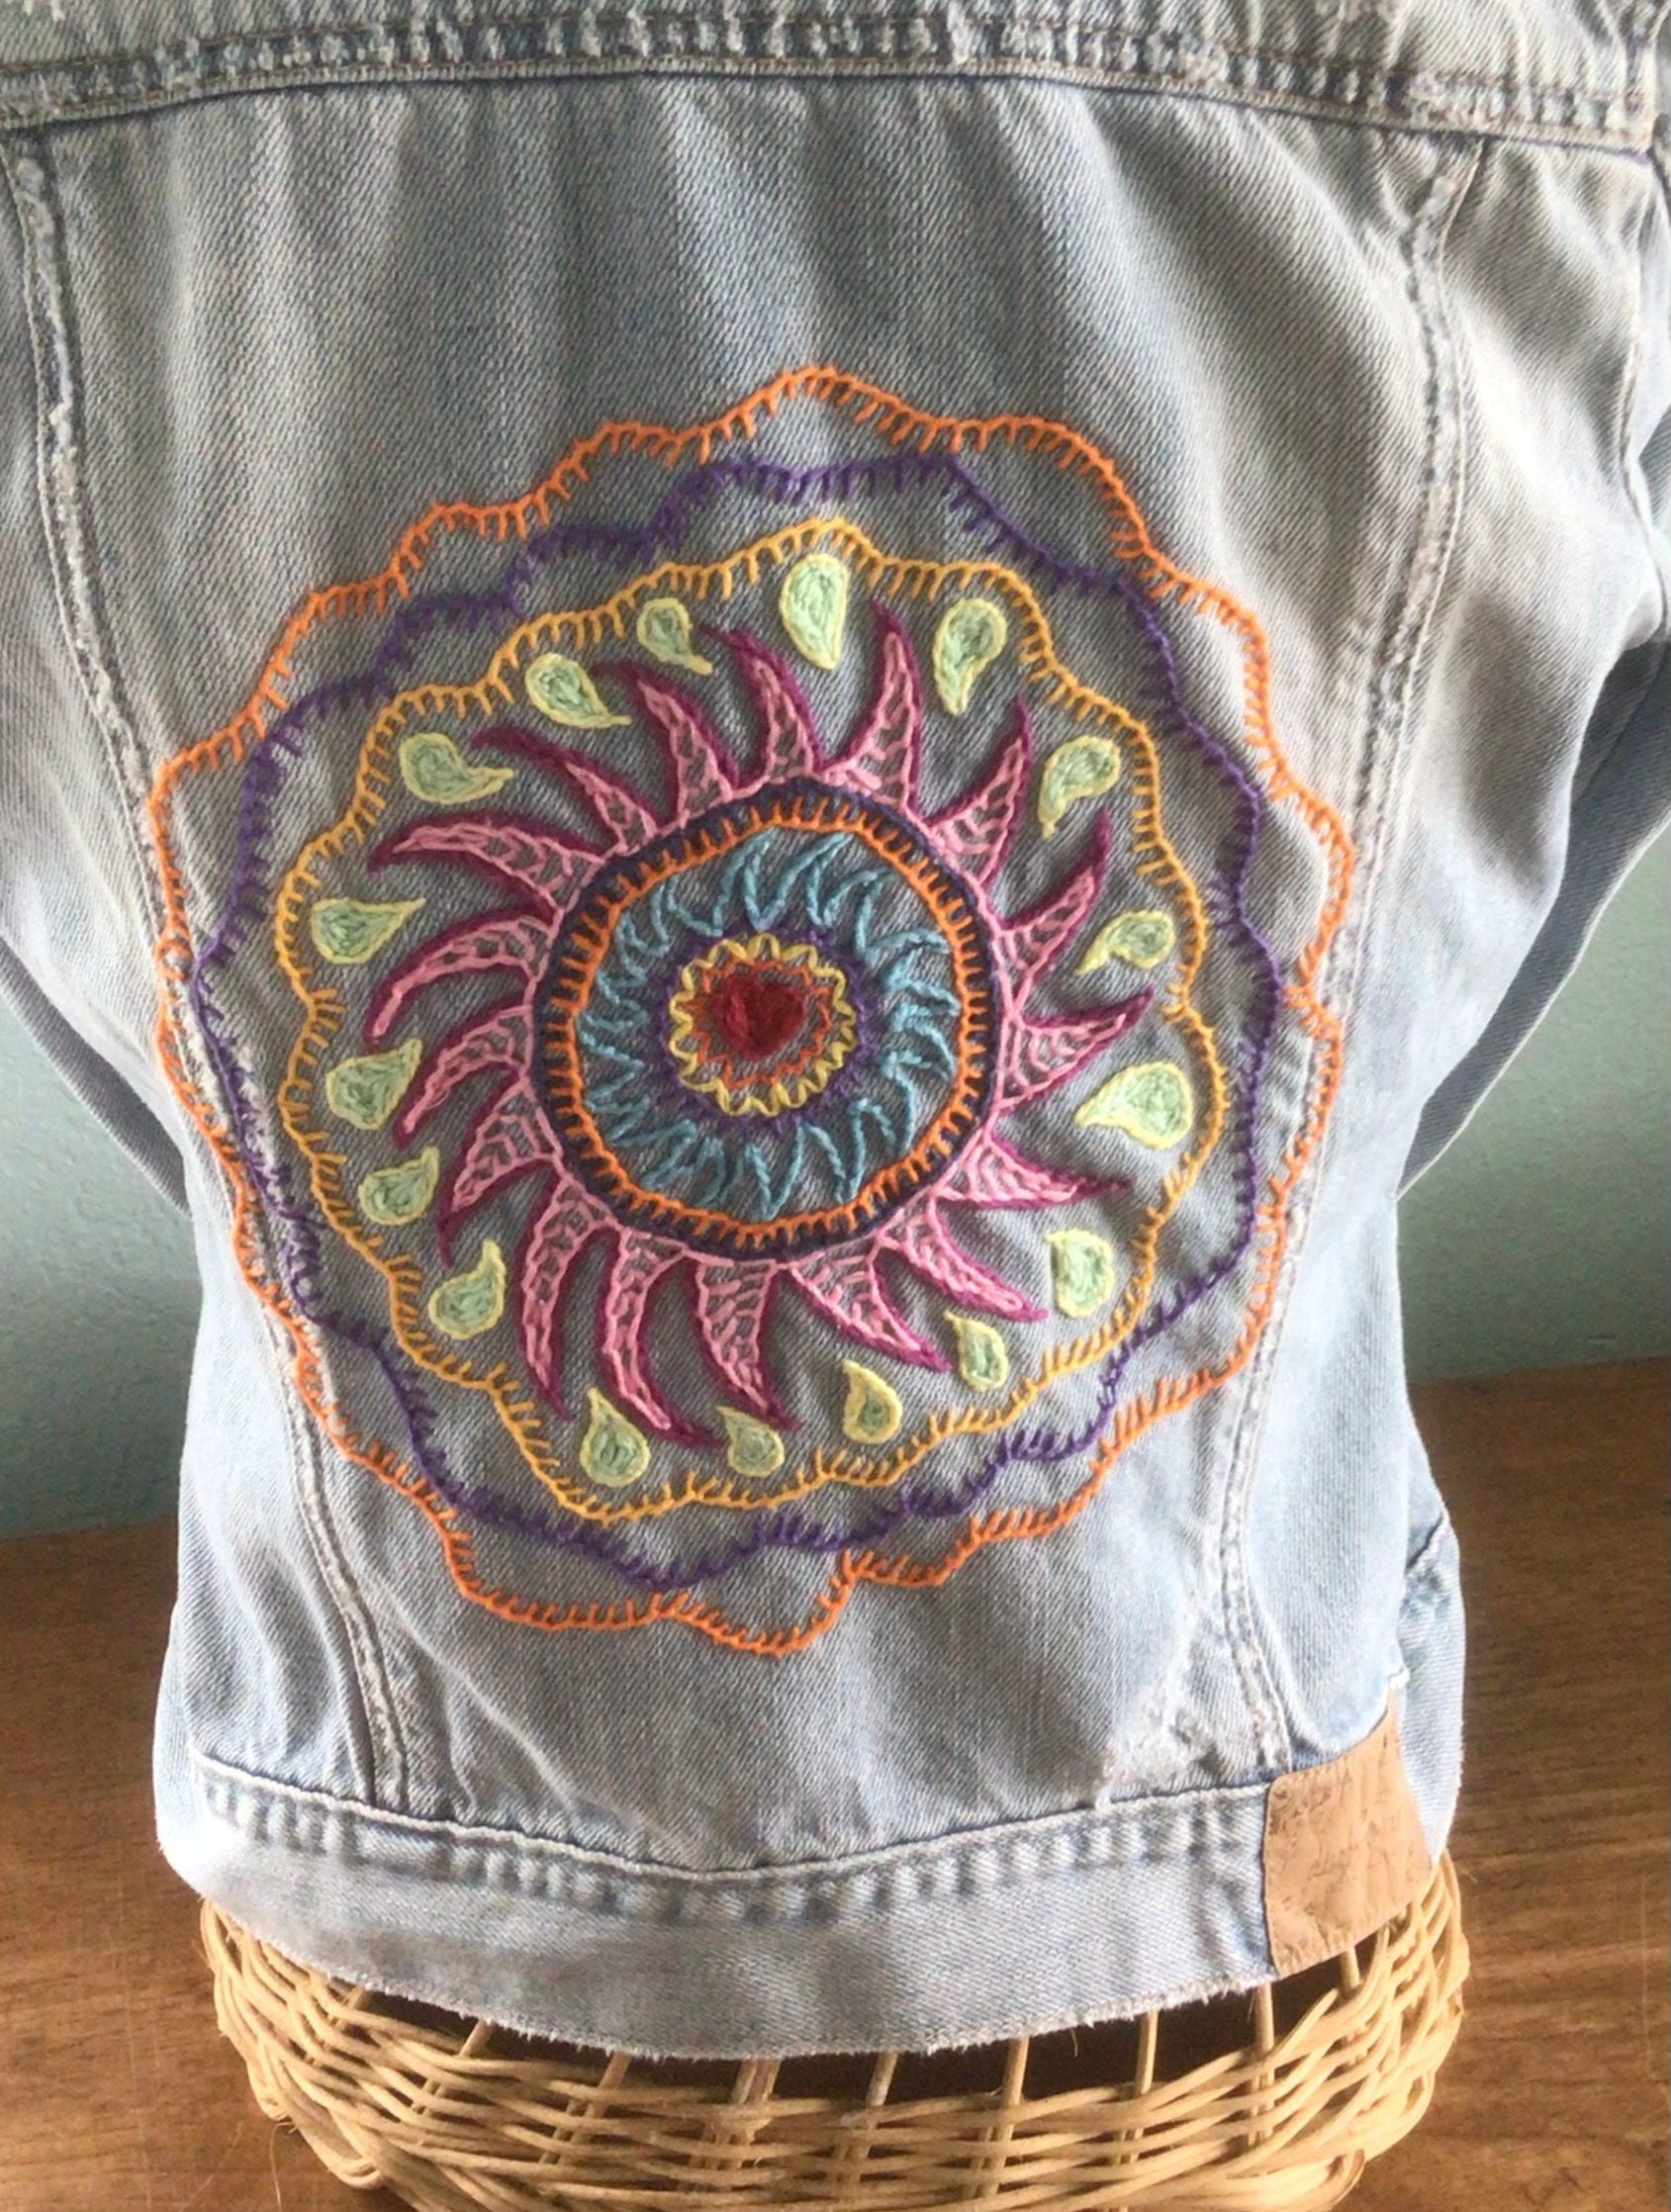 Framing A Mandala Stenciled On Burlap With A Thrifted Quilting